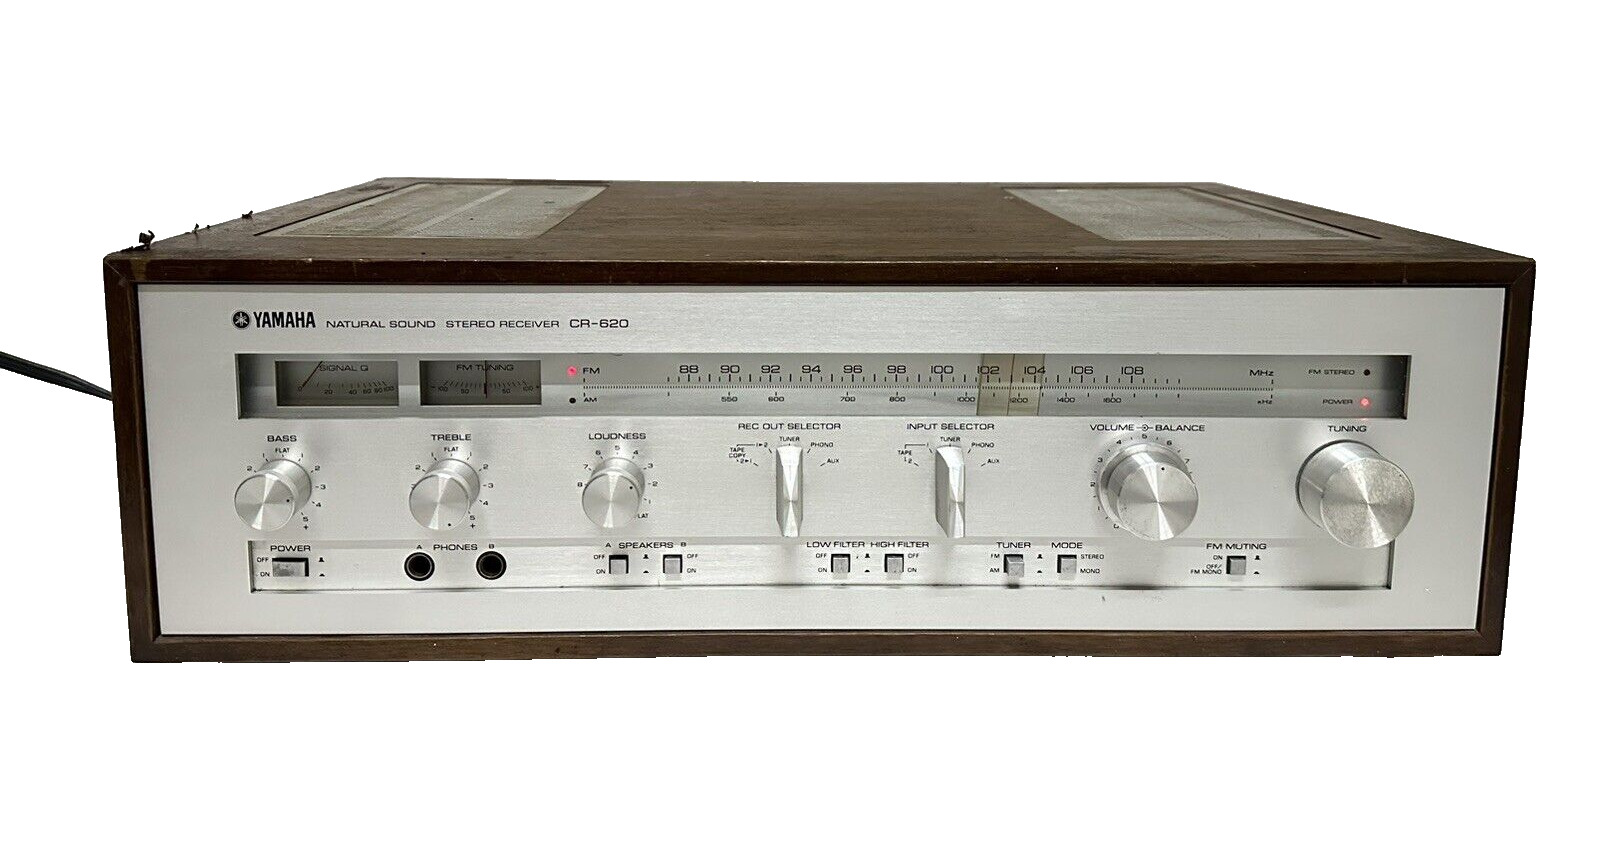 Vintage 1970s Yamaha CR-620 AM/FM Stereo Receiver ~ 22 WPC into 8Ω (Stereo)